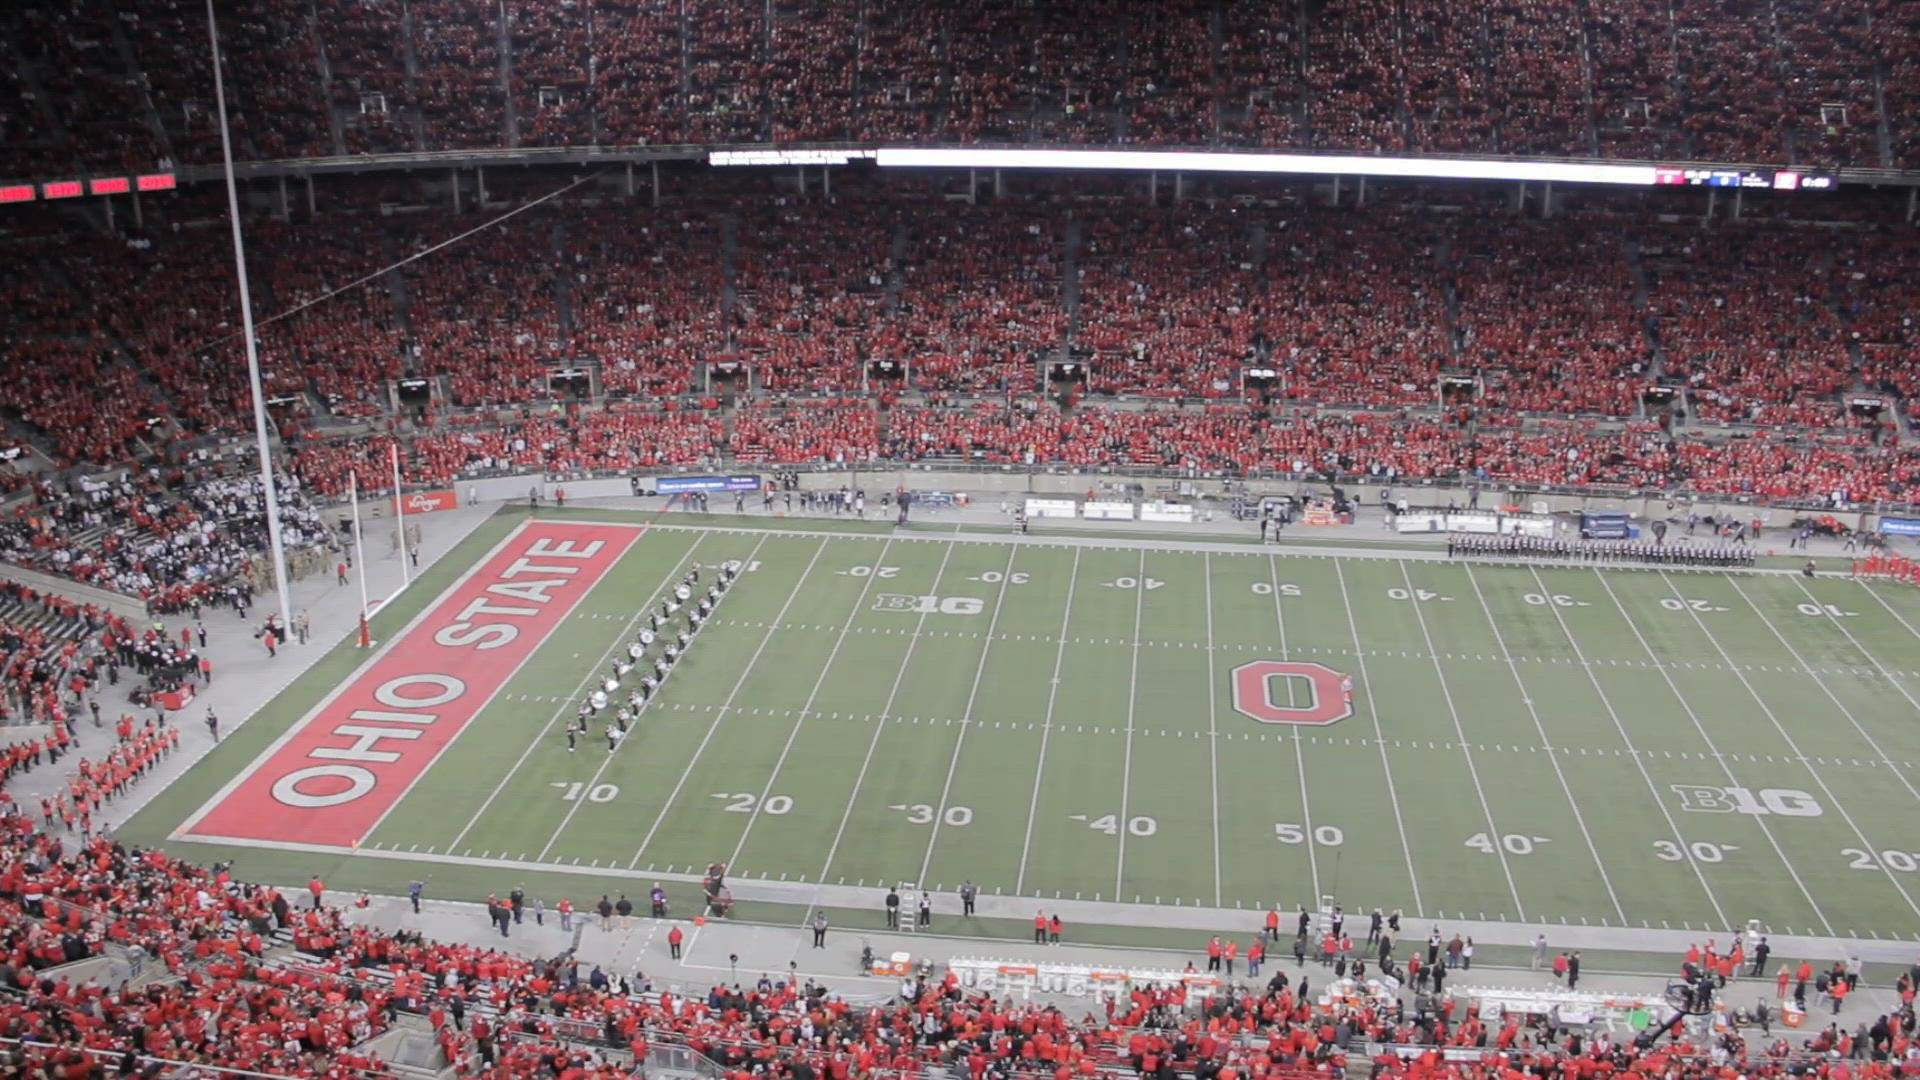 The Best Damn Band in The Land marches into Ohio Stadium ahead of the Buckeyes' matchup against Penn State.